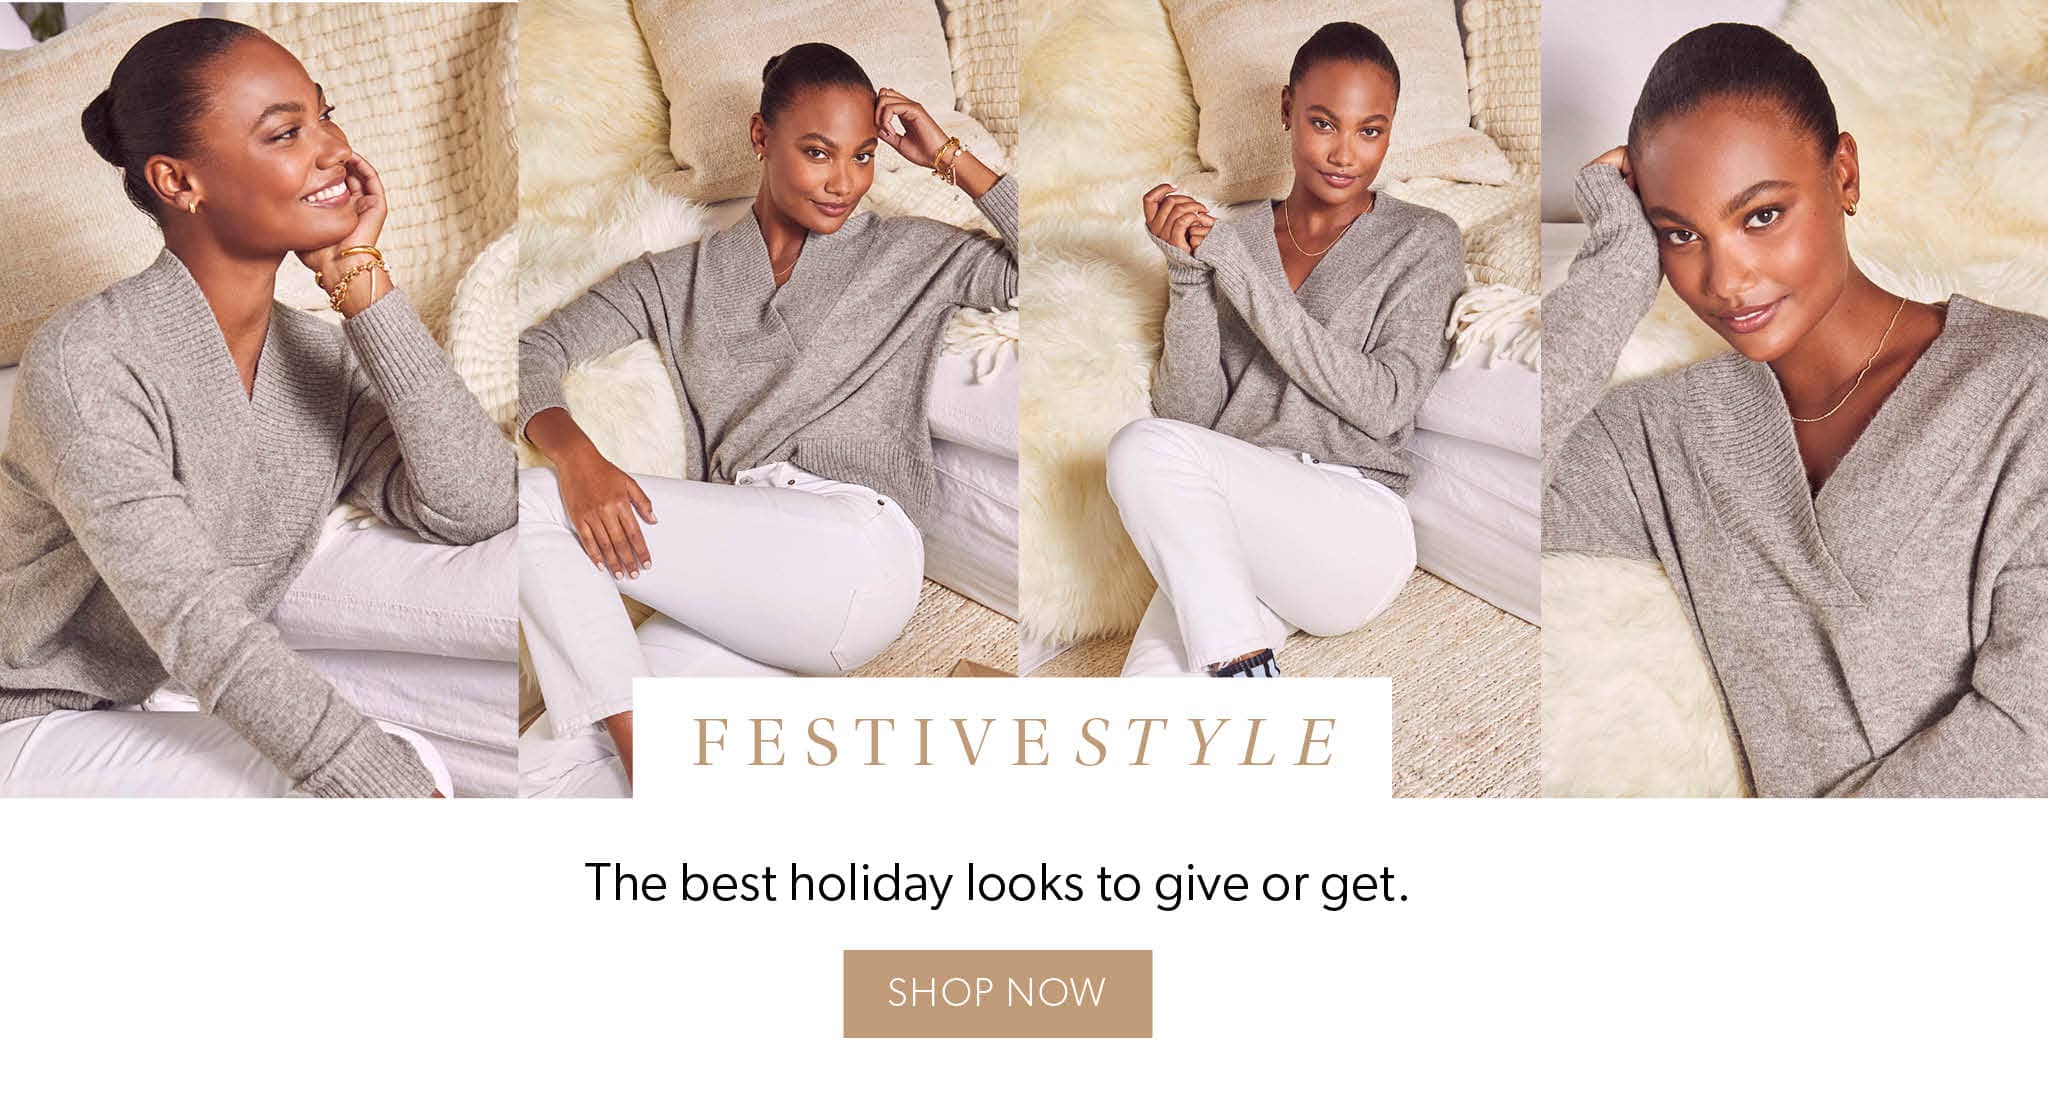 The best holiday looks to give or get. - Shop Now.